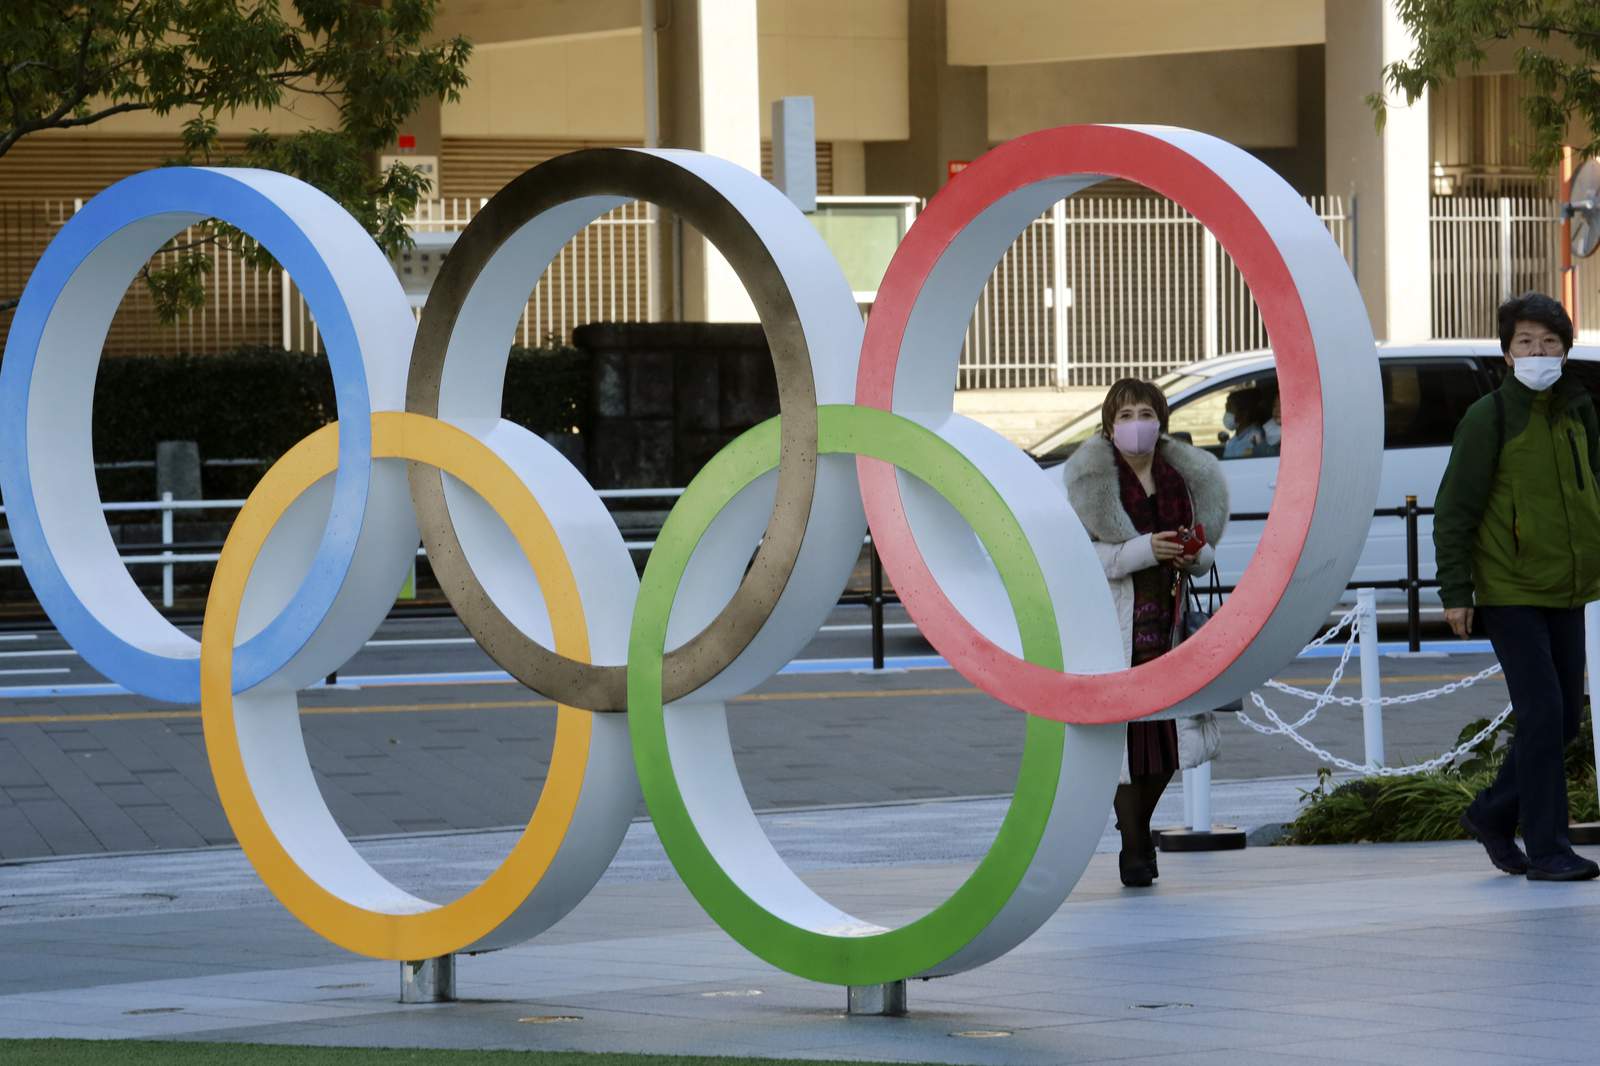 Tokyo Olympics opening ceremonies will air live in US